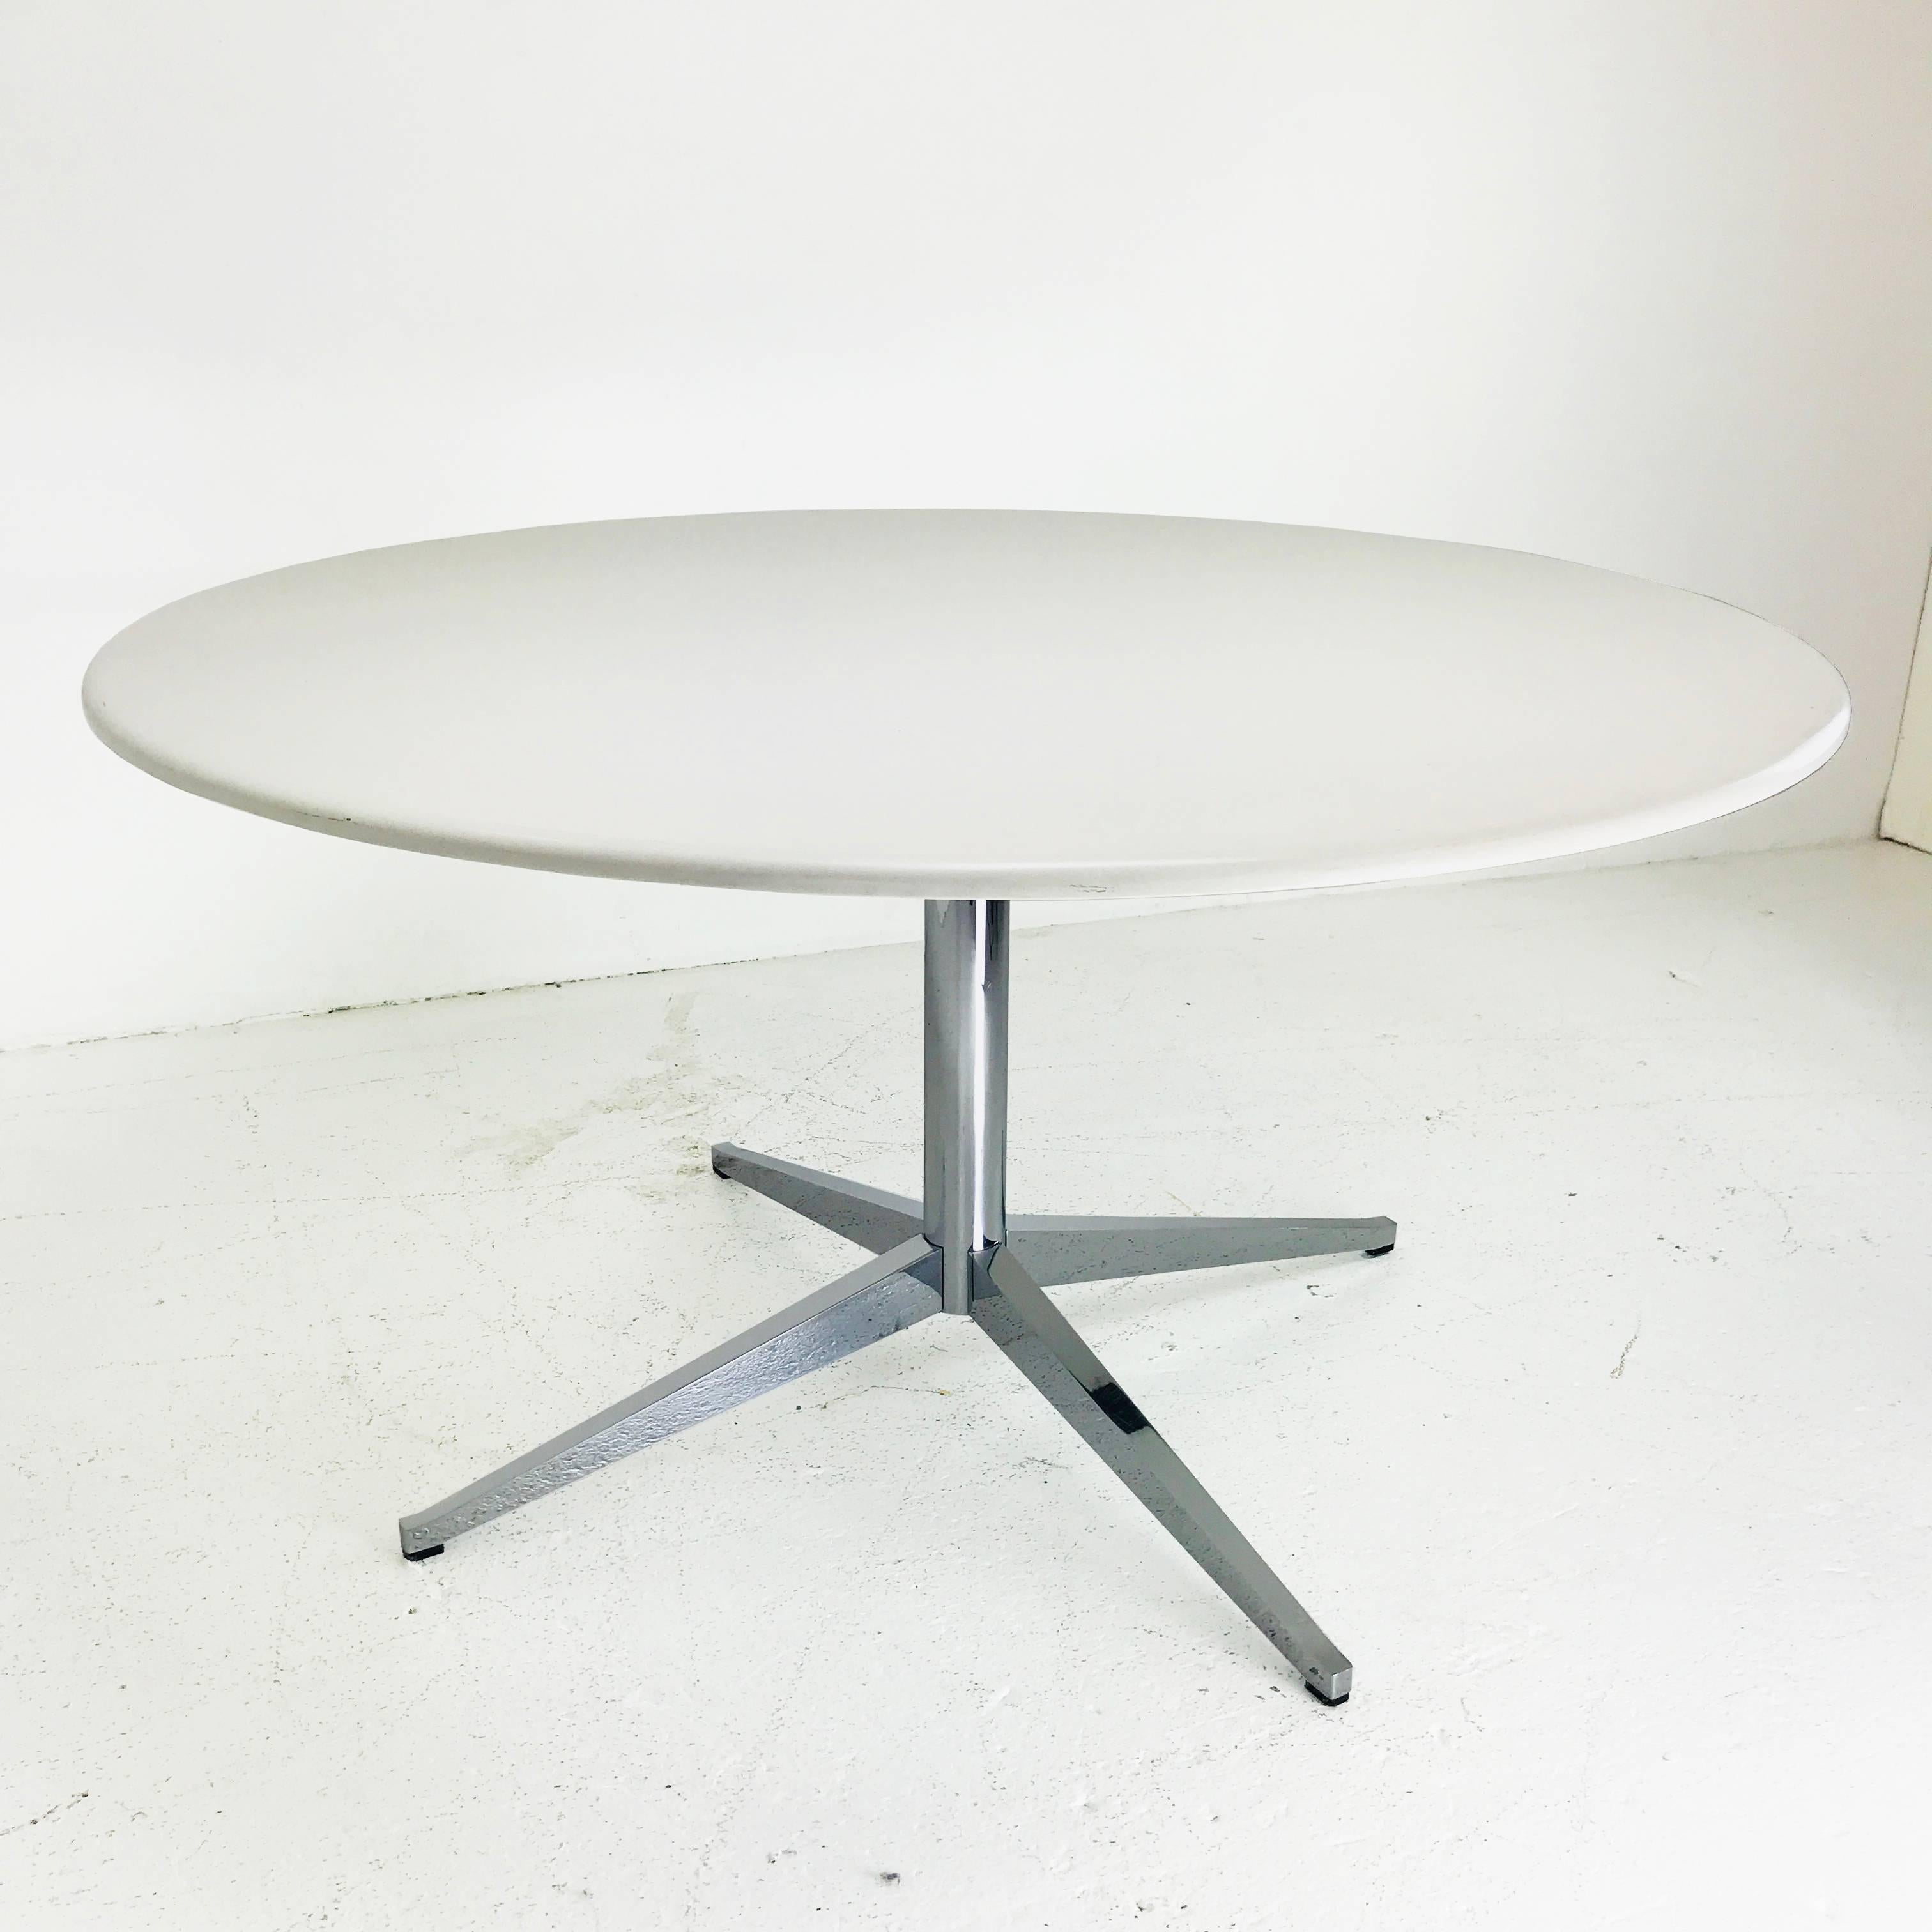 Knoll starburst table base with Corian tabletop.
In good vintage condition with wear due to age and use.

Dimensions:
54